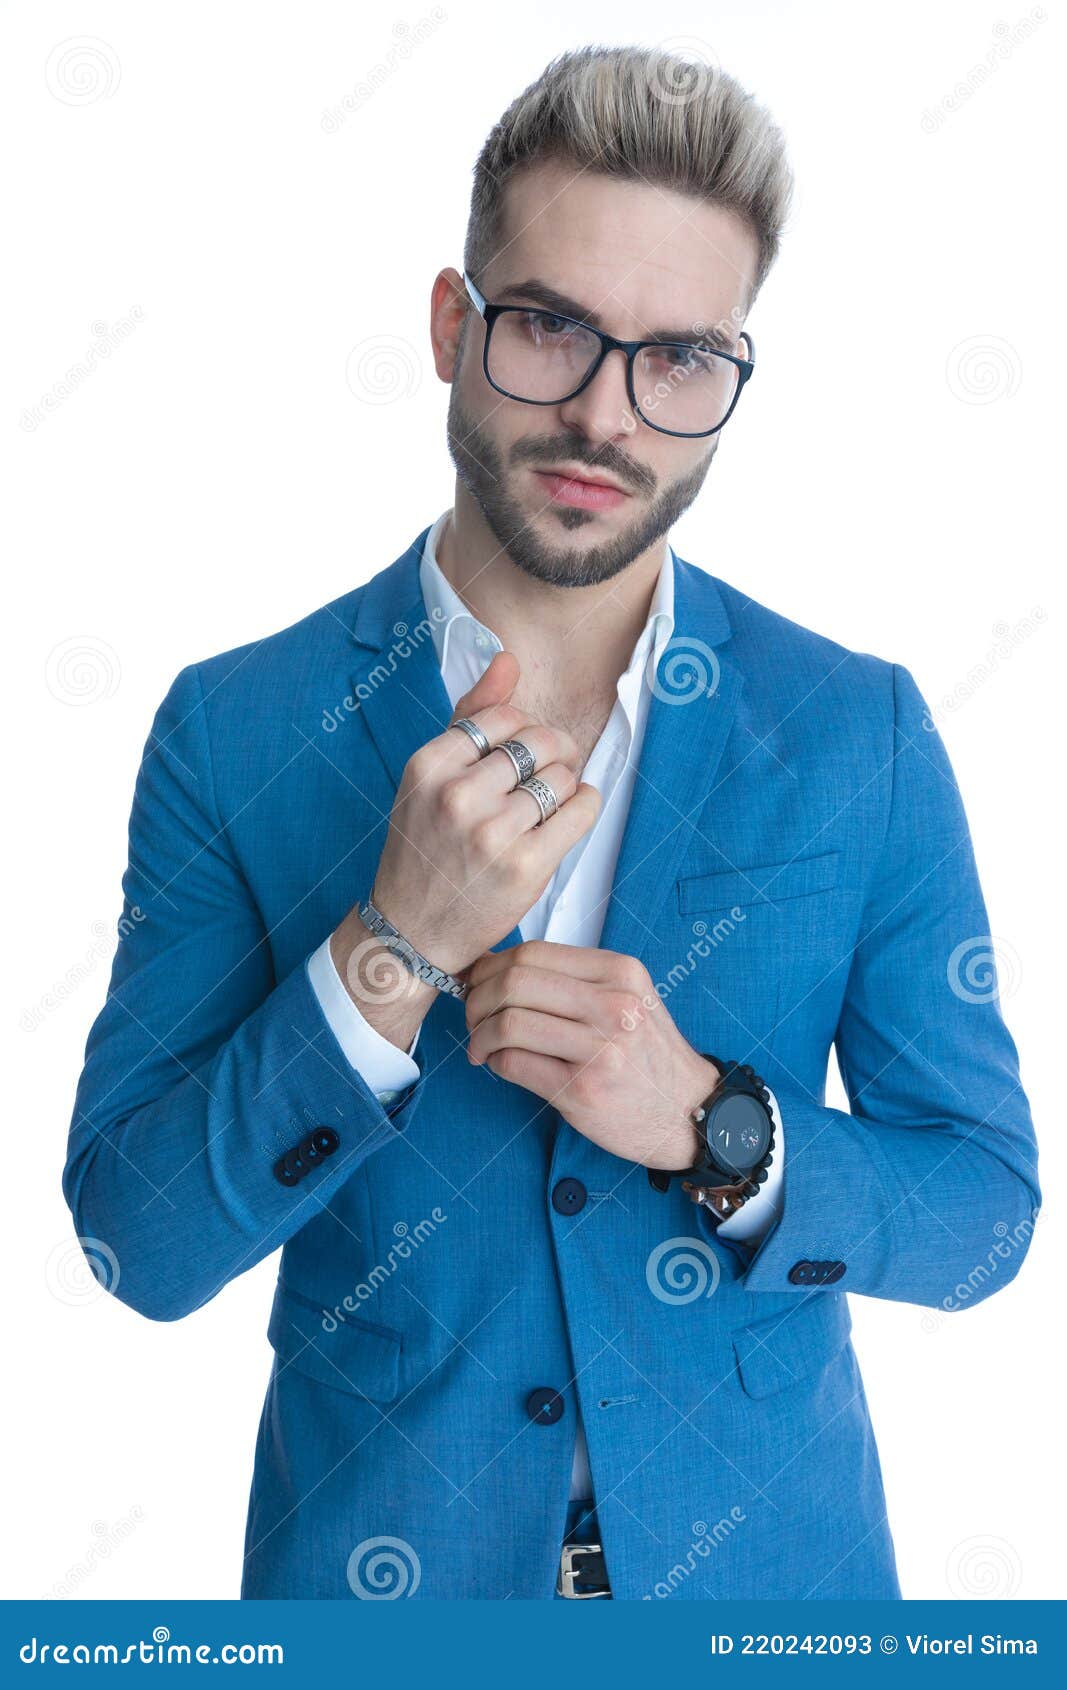 Male fist with bracelet on formal suit background. Bracelet or amulet on  wrist. Amulet concept. Hand of business person with amulet made out of  black beads. Symbol of luck or fashionable accessory